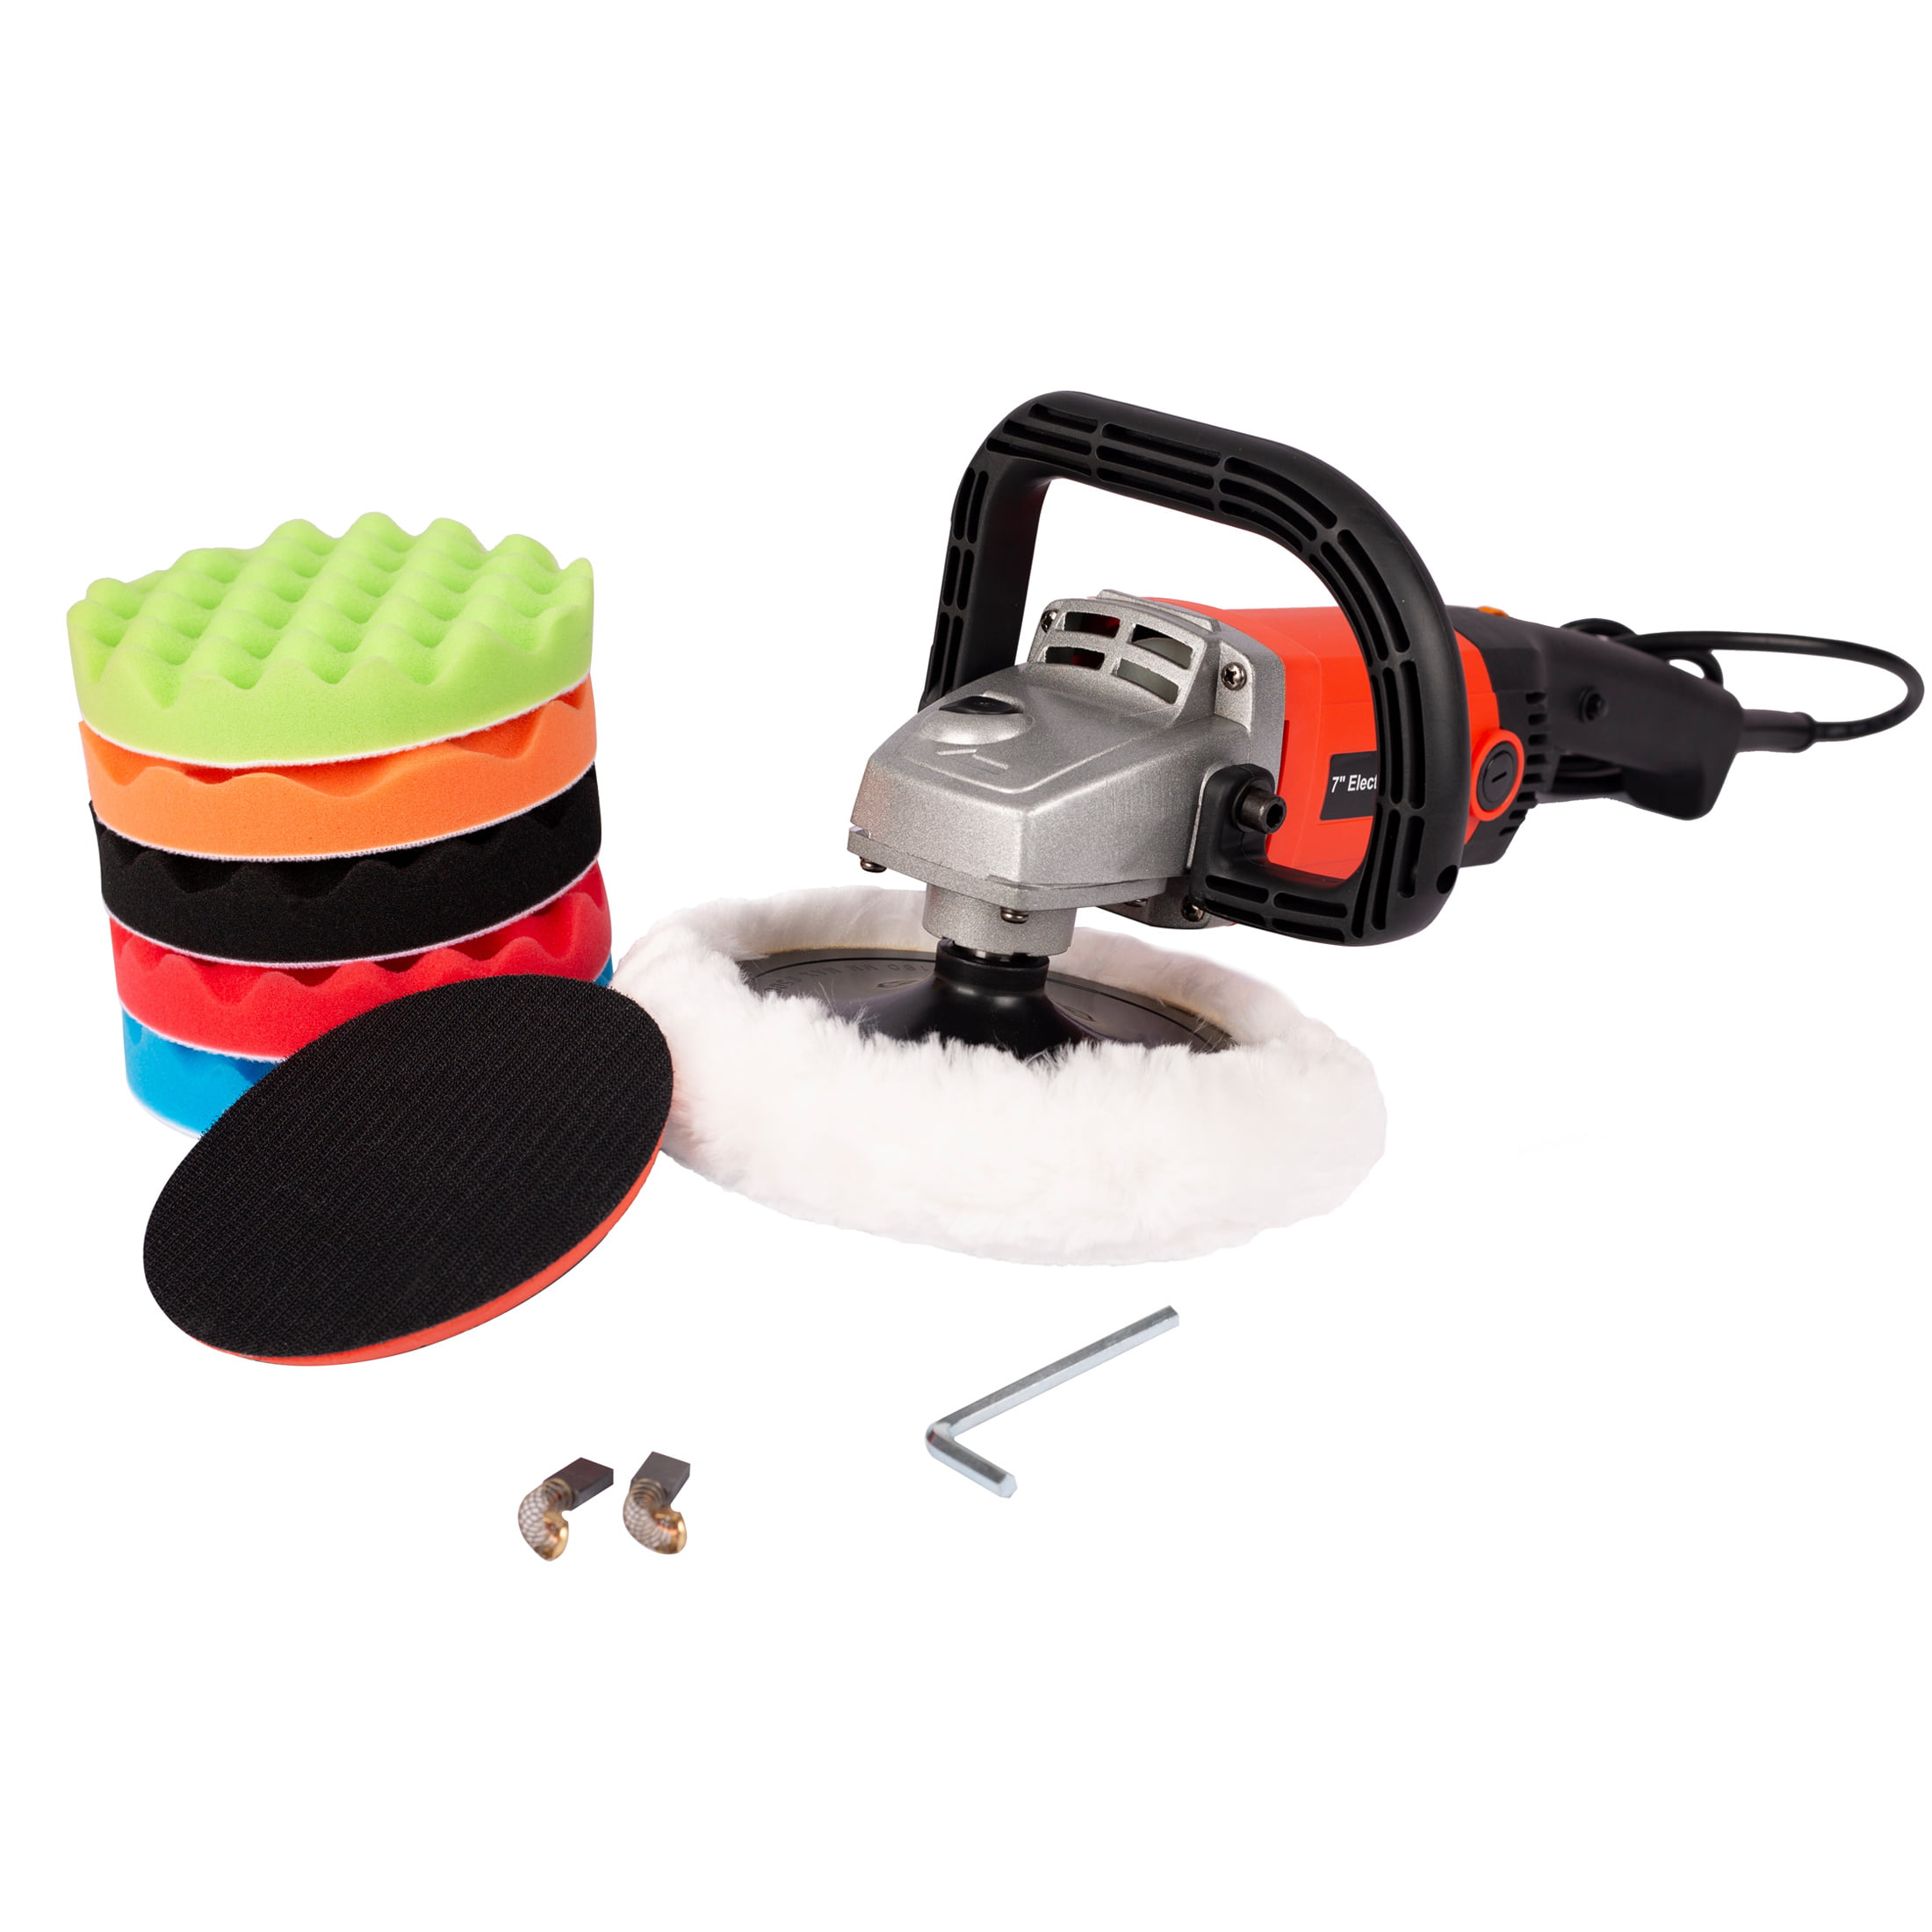 Polisher, Car Polishing Machine 10-Amp Electric 7 inch Pad with Accessory Kit 6 Variable Speeds to Buff, Polish, Smooth and Finish, Ideal for Car and